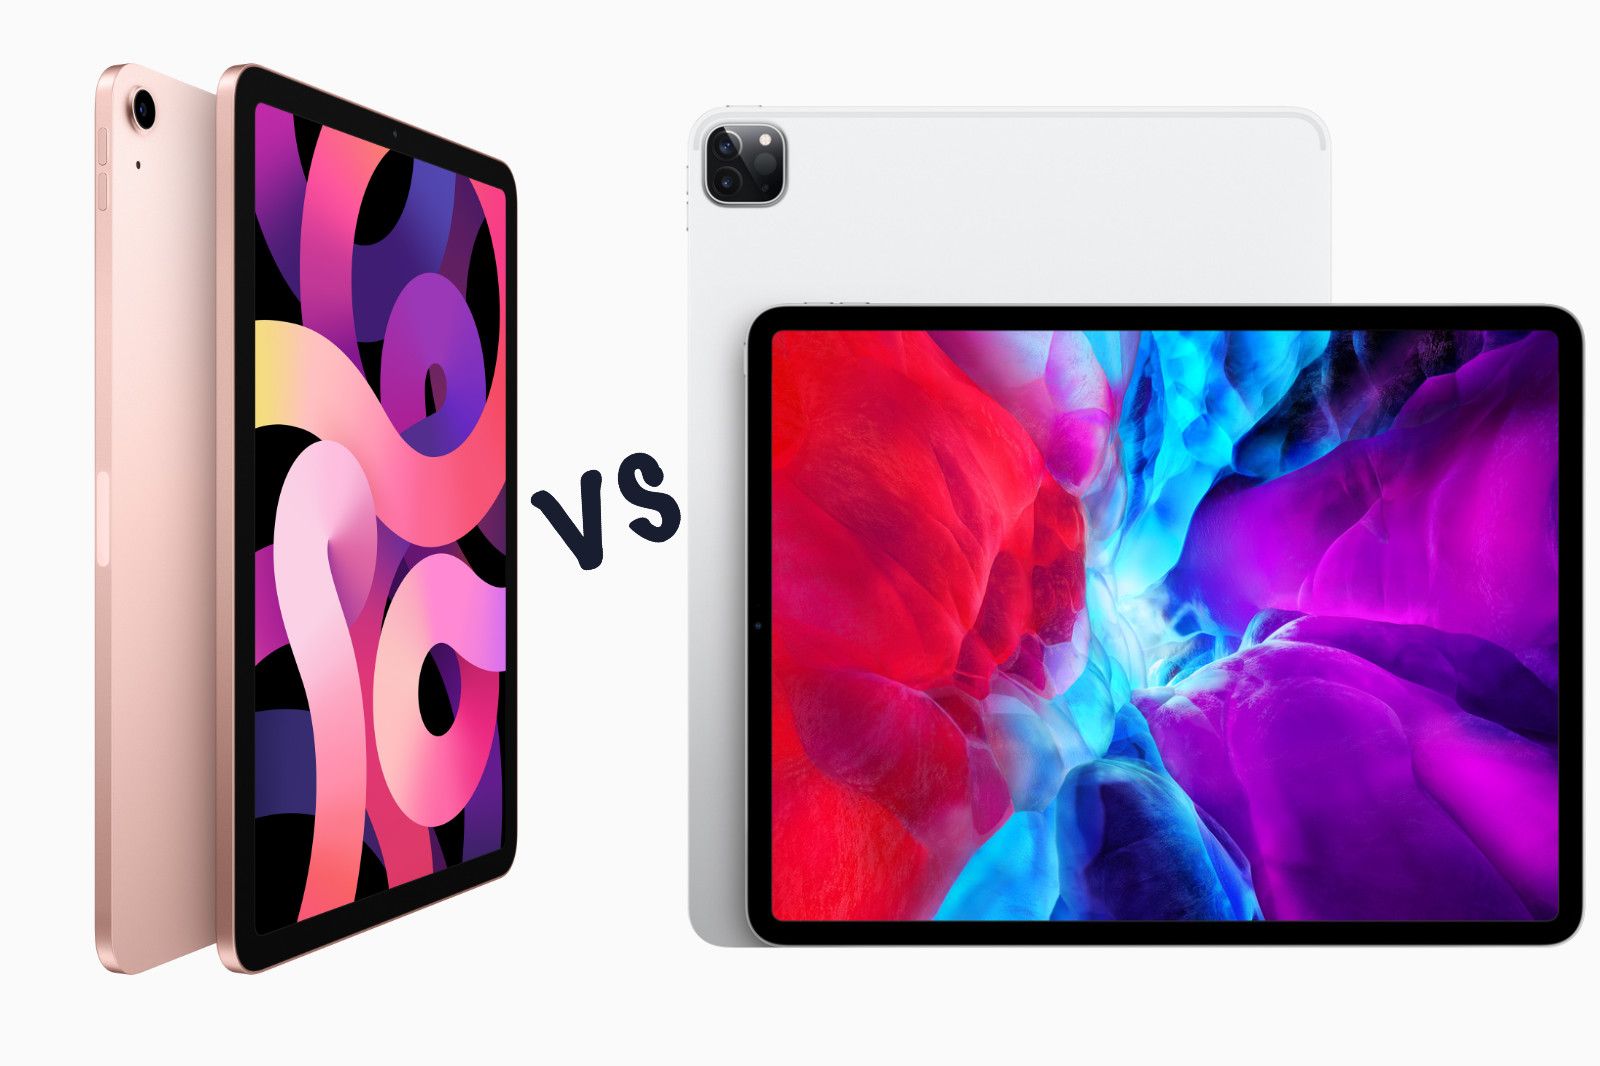 Apple iPad Air 2020 vs iPad Pro 2020: What's the difference? photo 1